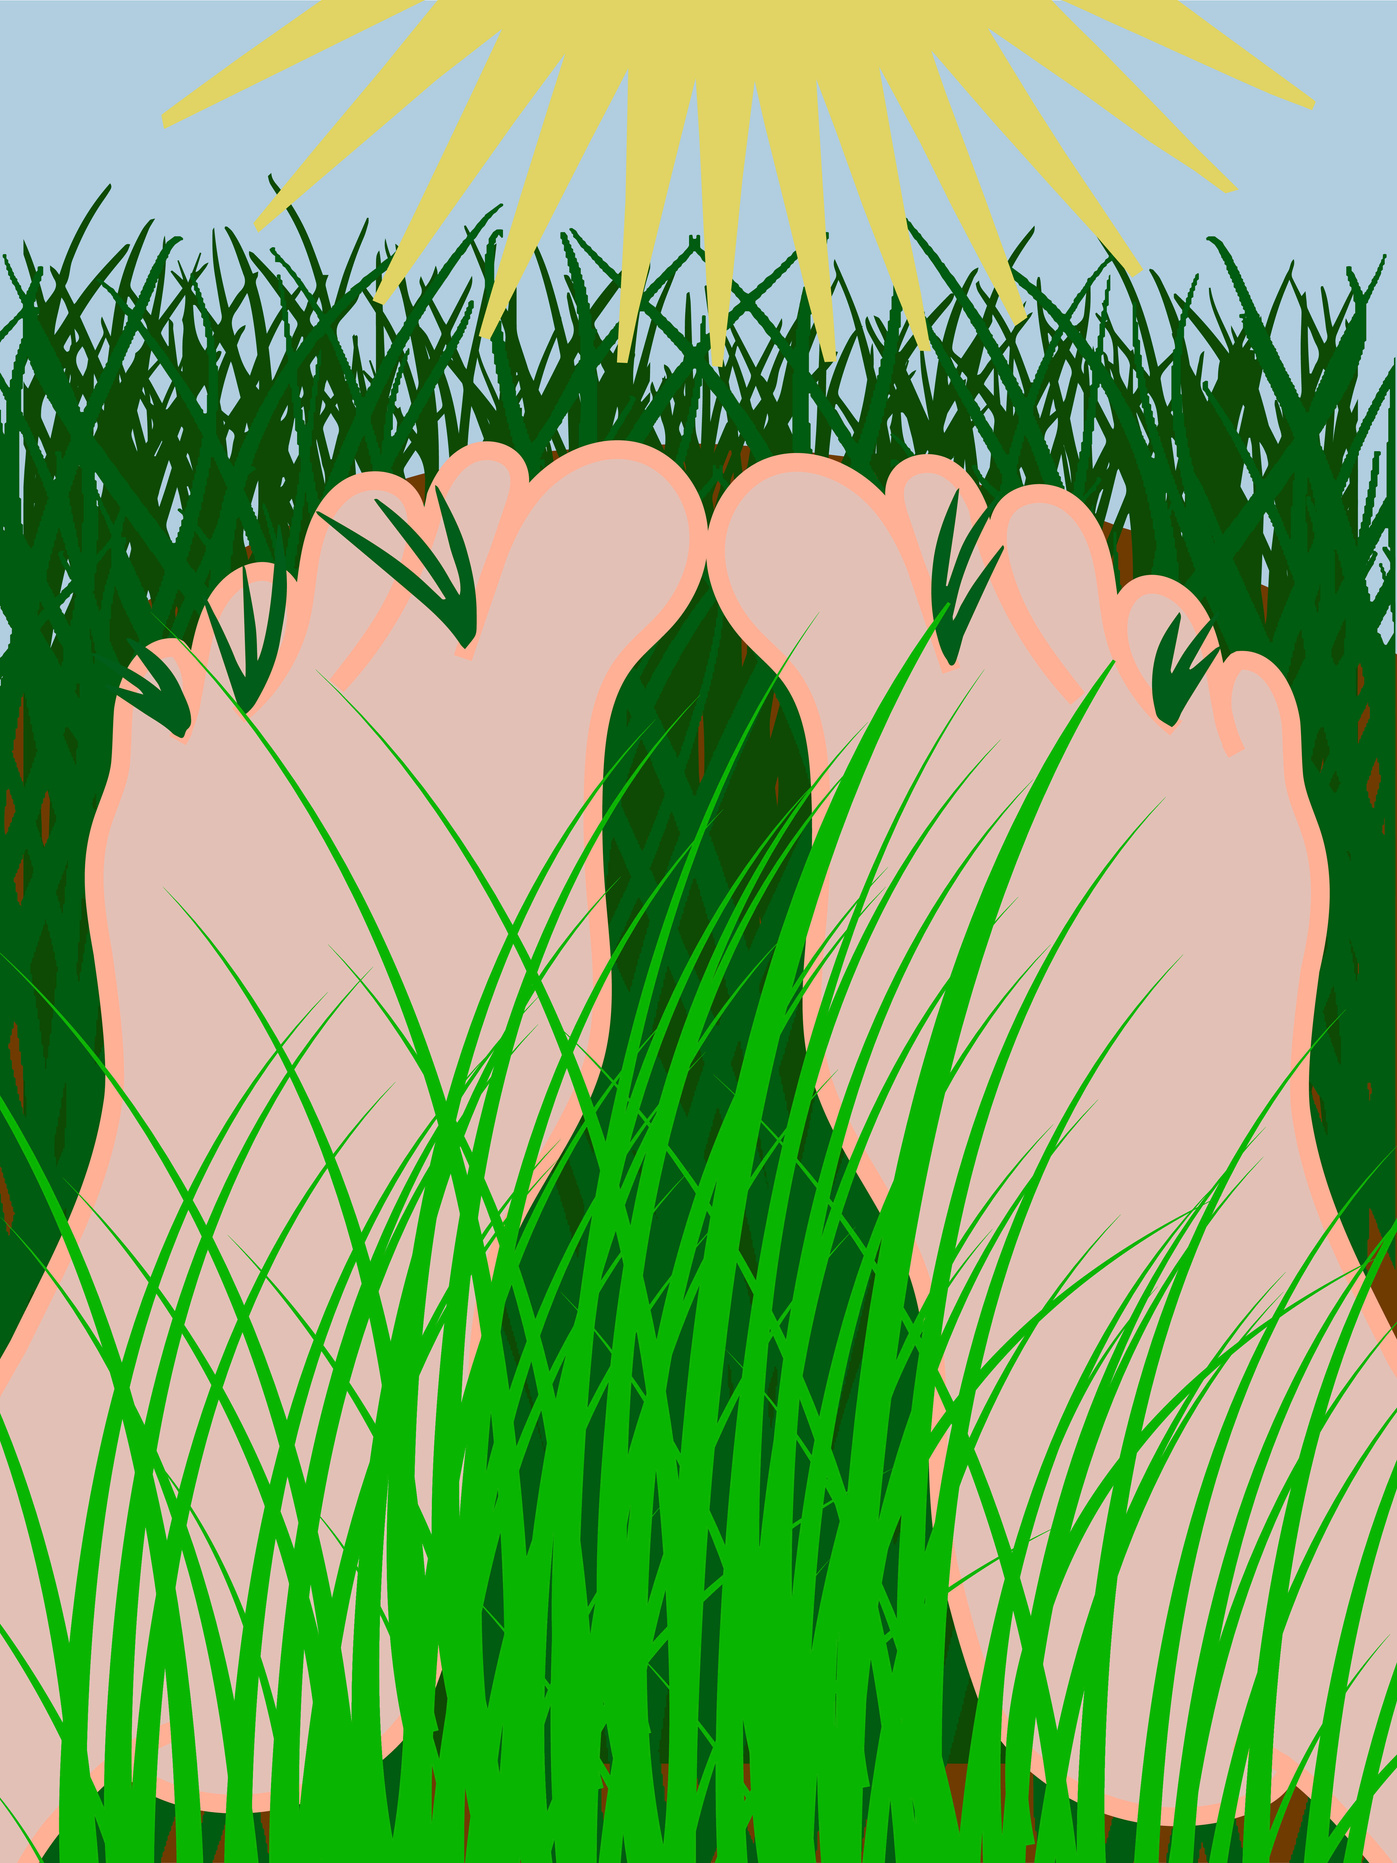 a digital drawing. close up of two feel lying in the grass with the grass blades between the toes. the grass is green and the sun is shining above them. the sky is blue.